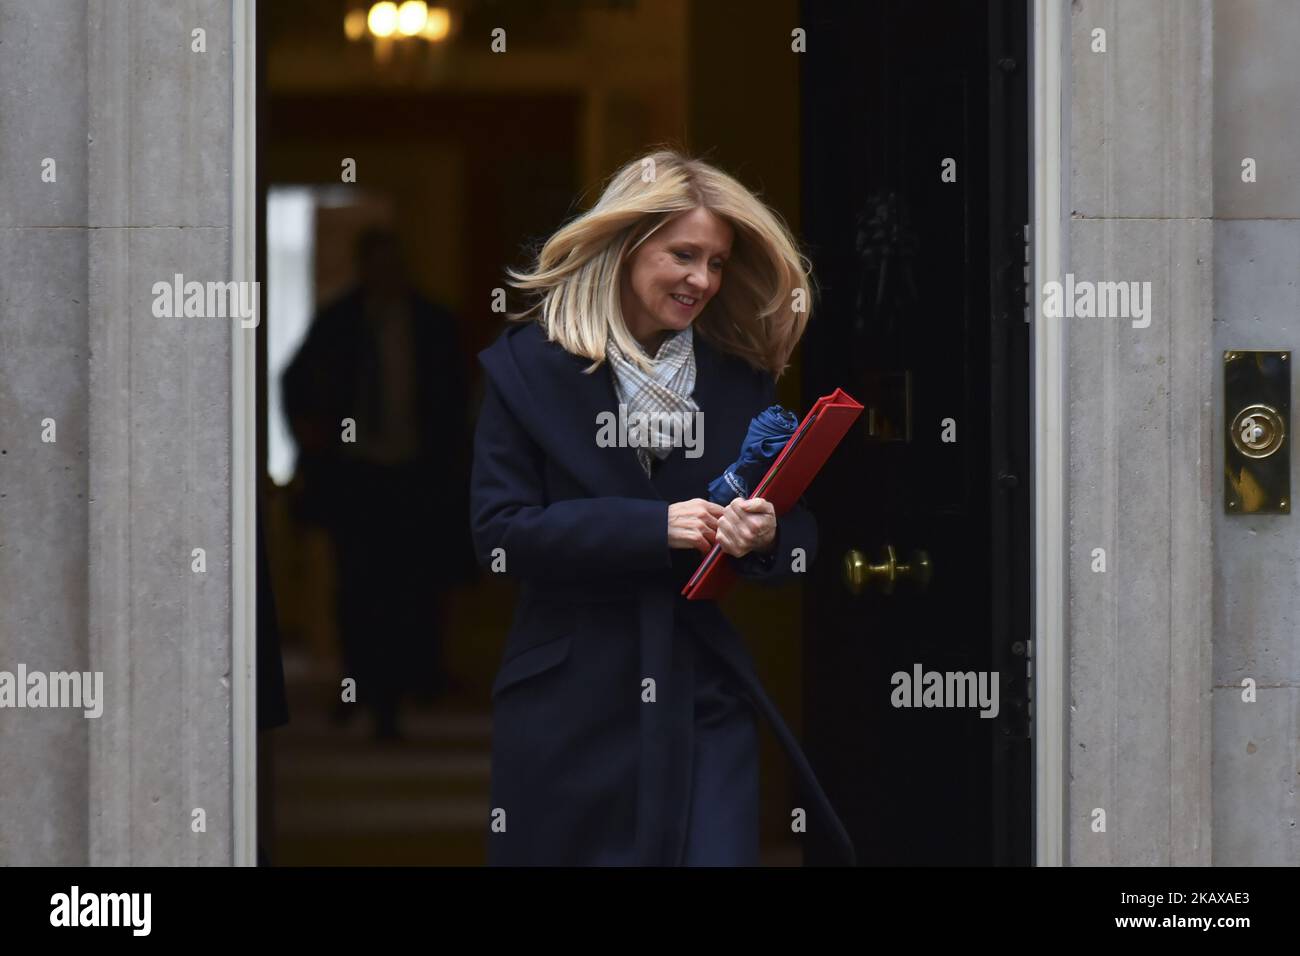 Secretary of State for Work and Pensions esther McVey leaves 10 Downing Street after attending the weekly Cabinet Meeting, London on March 27, 2018. Prime Minister Theresa May is facing another Brexit hurdle after the opposition Labour Party announced its pushing for a legal commitment to avoid a hard border with Ireland after Britain leaves the European Union. The Migration Advisory Committee (MAC) said businesses are concerned about their ability to recruit workers from the EU after Britain leaves the EU. UK employers also see EU workers as 'more reliable' and eager than their British counte Stock Photo